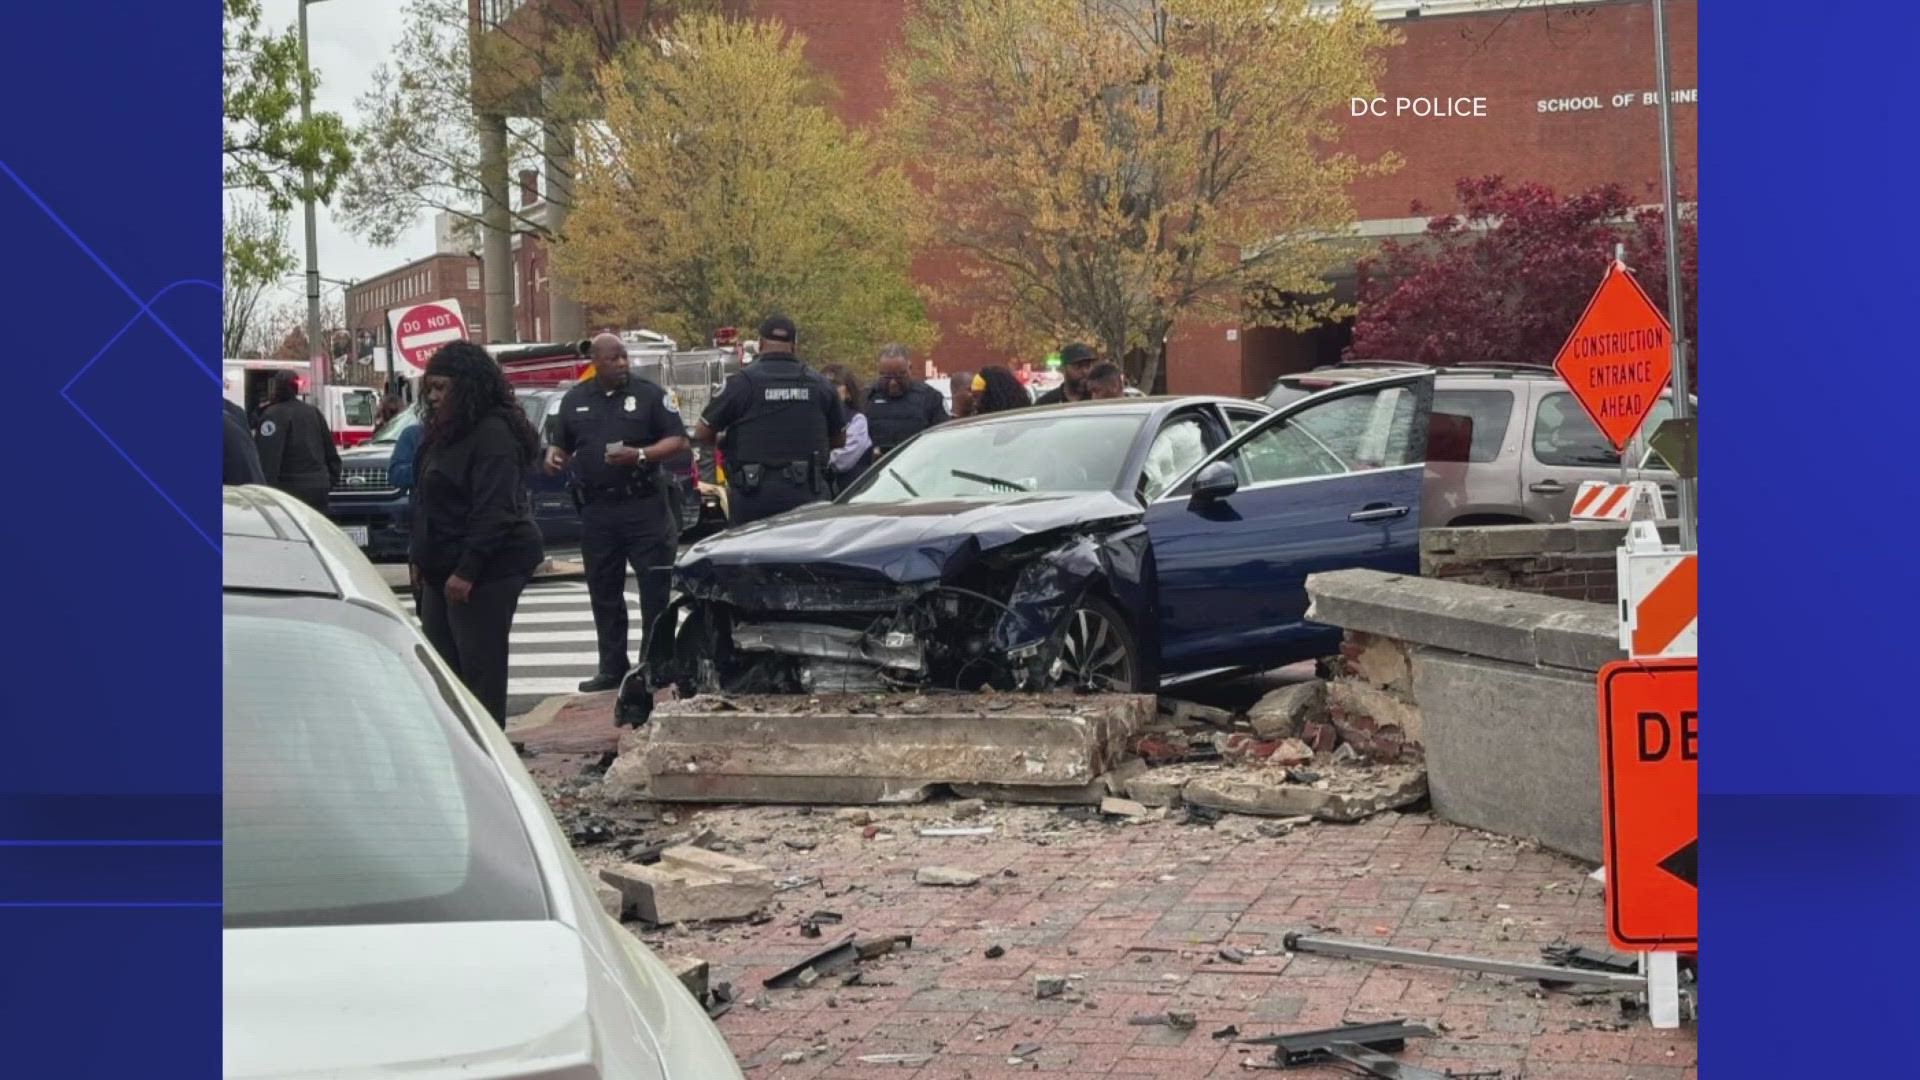 According to the Metropolitan Police Department, the crash happened shortly after 3:30 p.m. on Thursday, April 11.